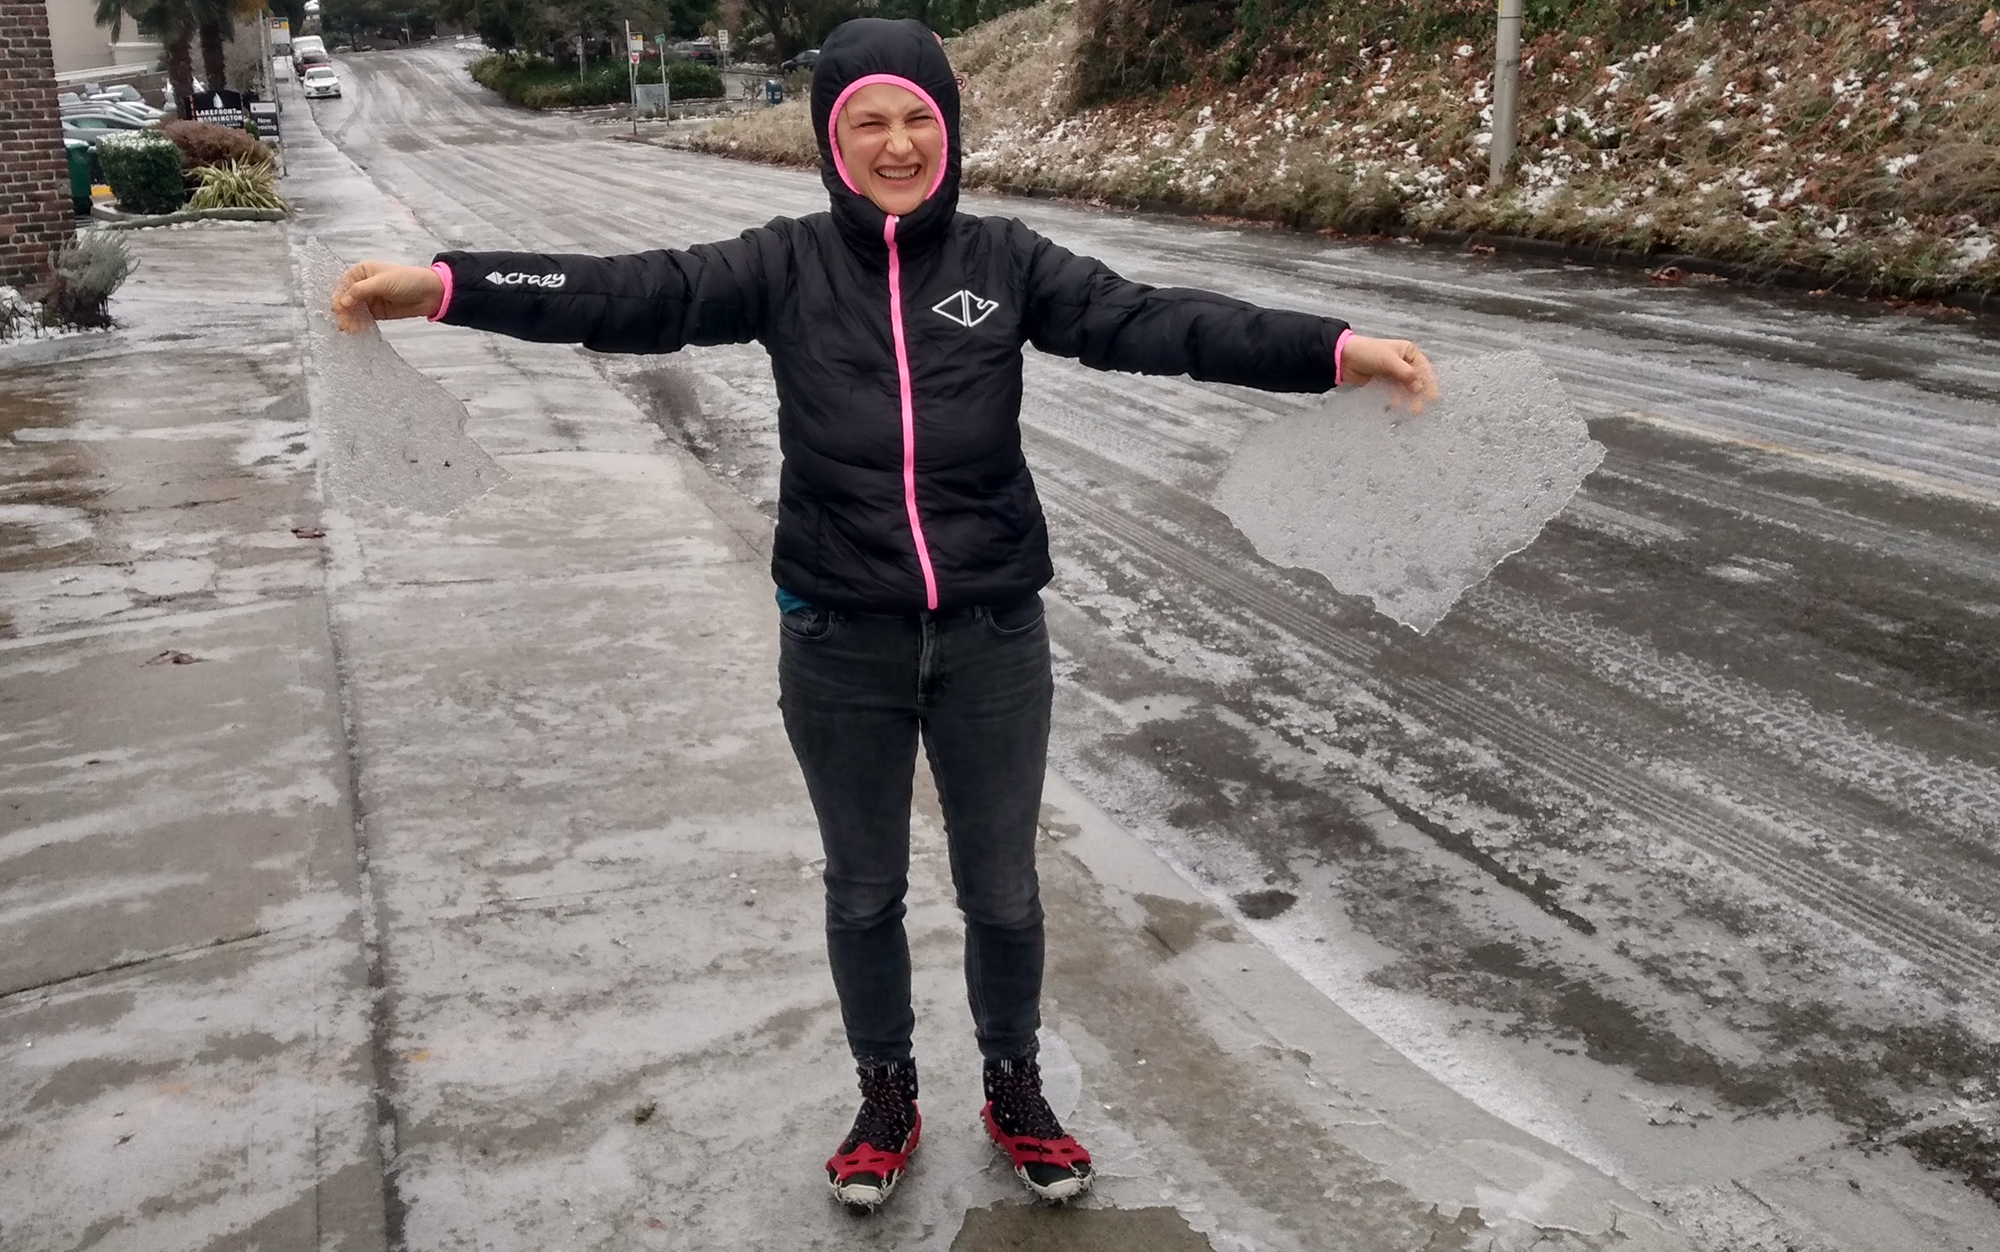 The Crazy Levity easily covered my entire torso, arms, and headâa feature I appreciated while exploring my local neighborhood the day after an ice storm. 